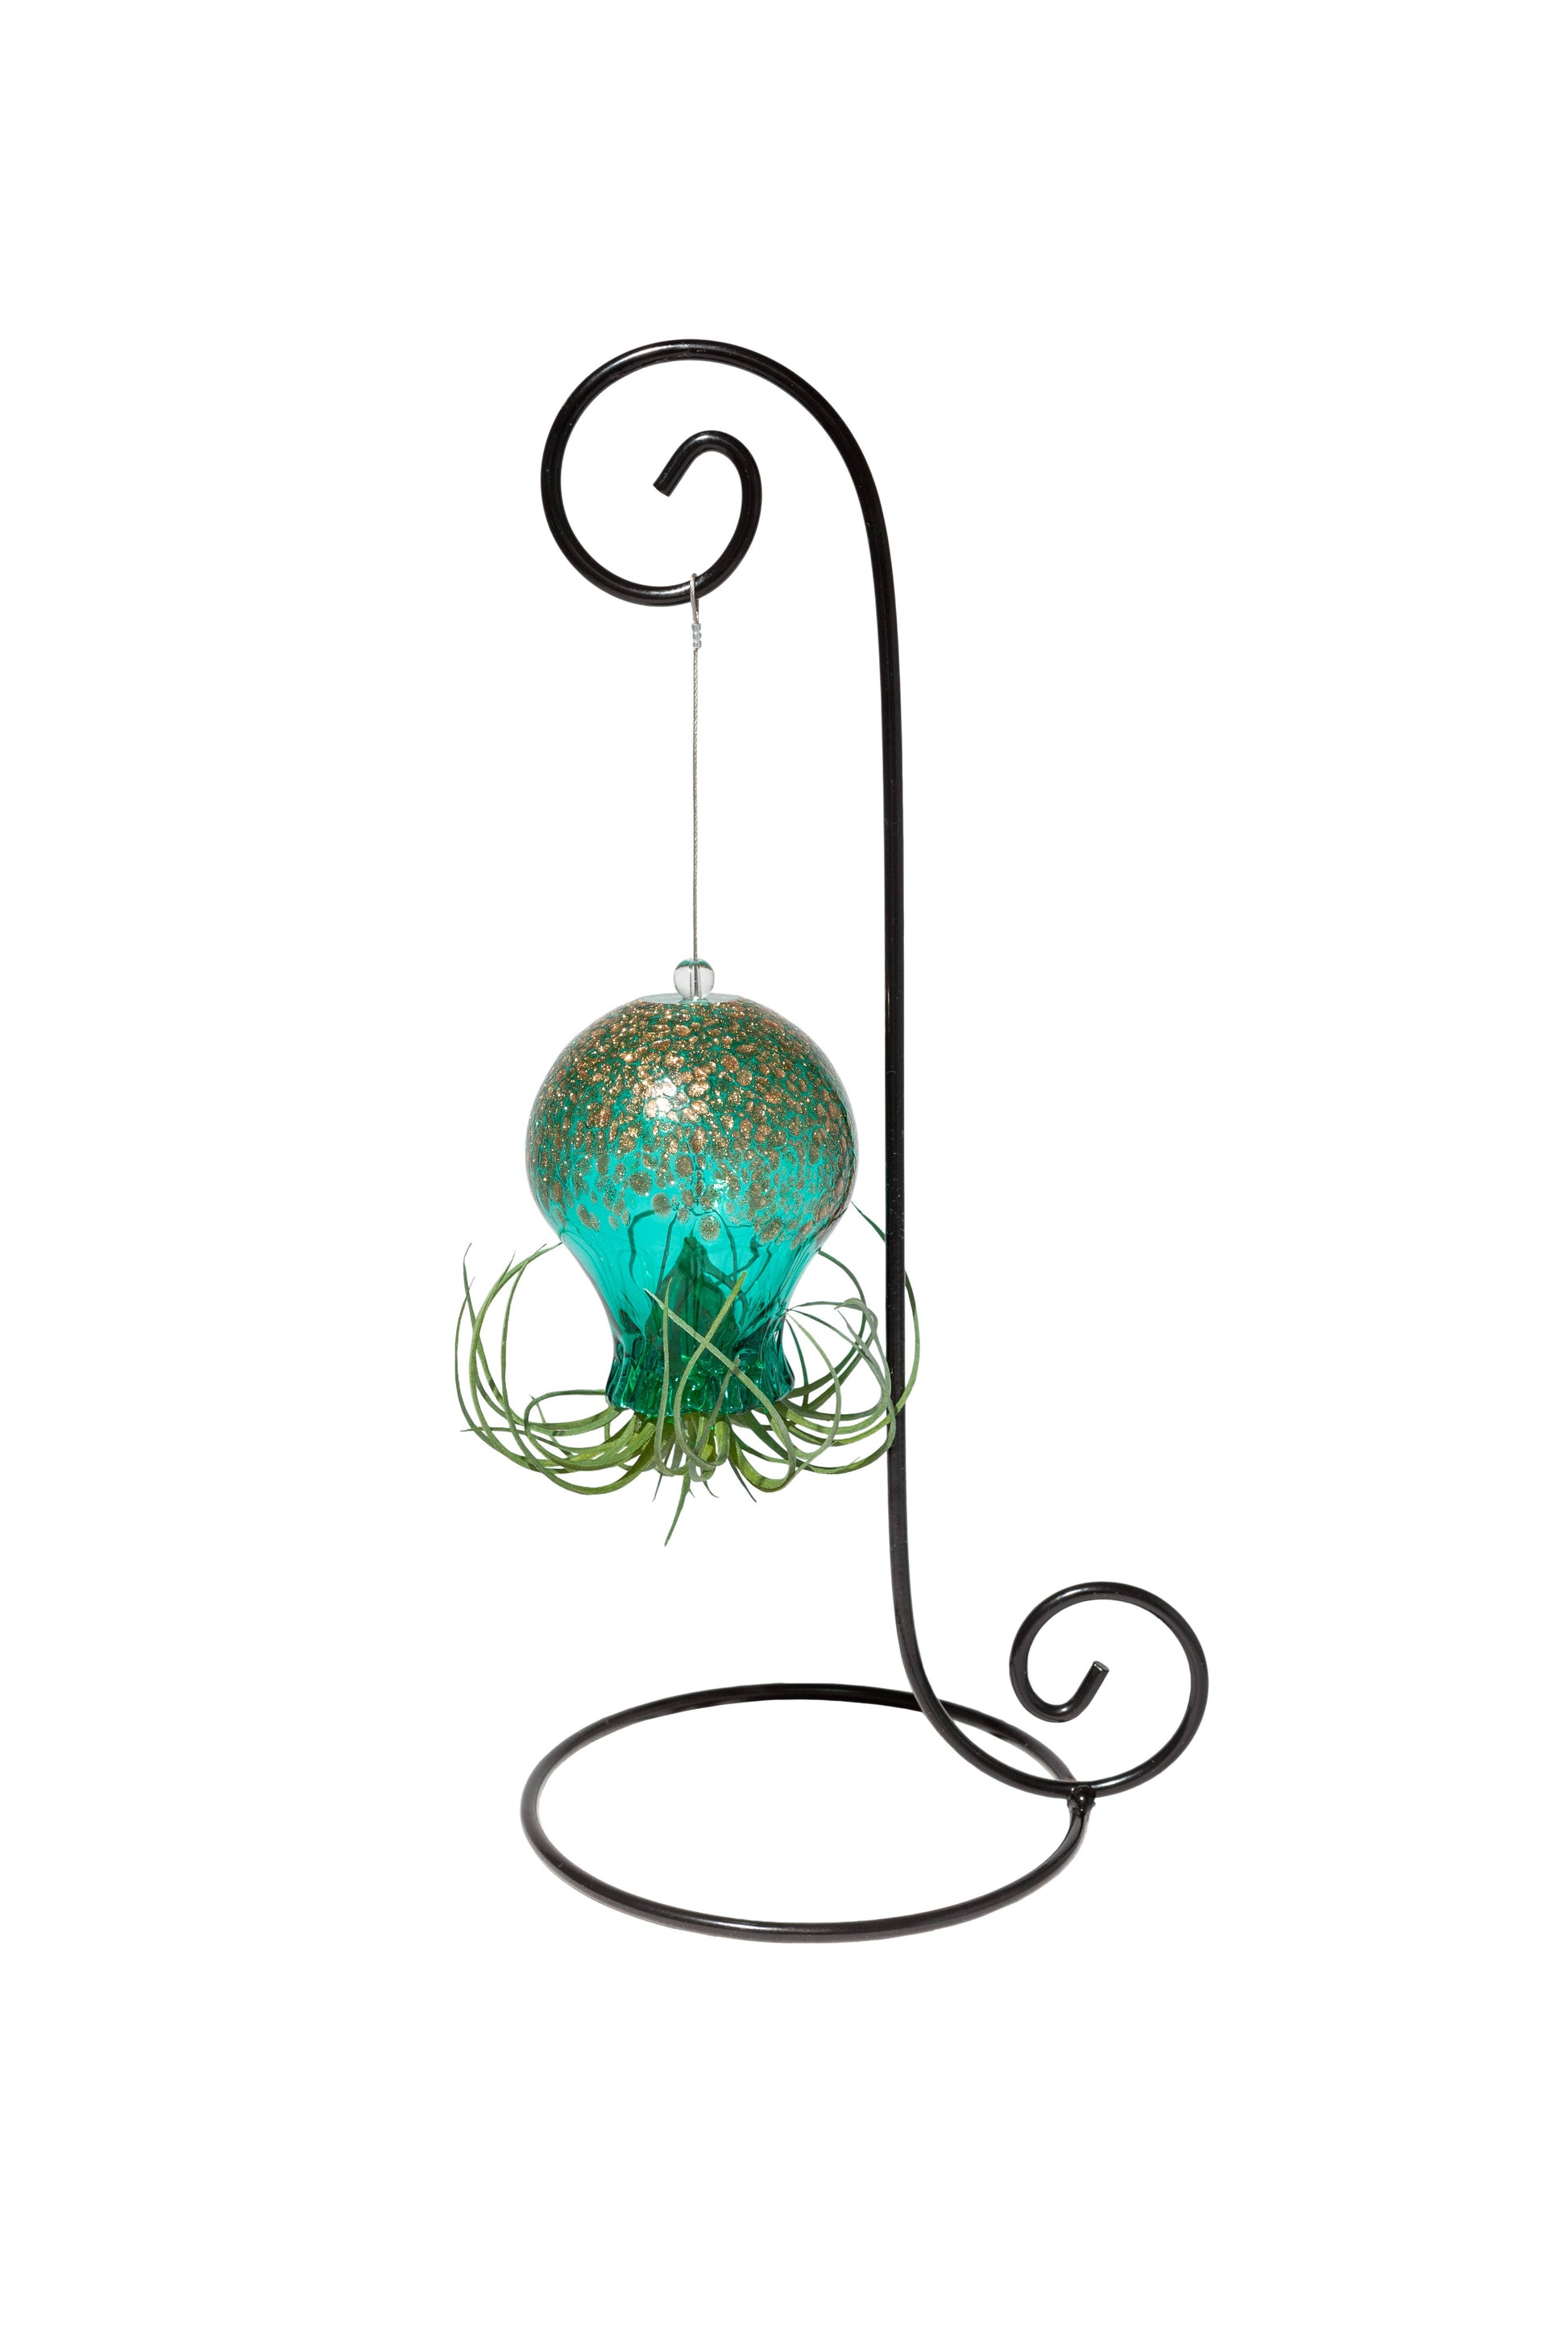 Octopus Hand Blown Art Glass Air Plant Holder Or Metal Stand - CJ Gift Shoppe